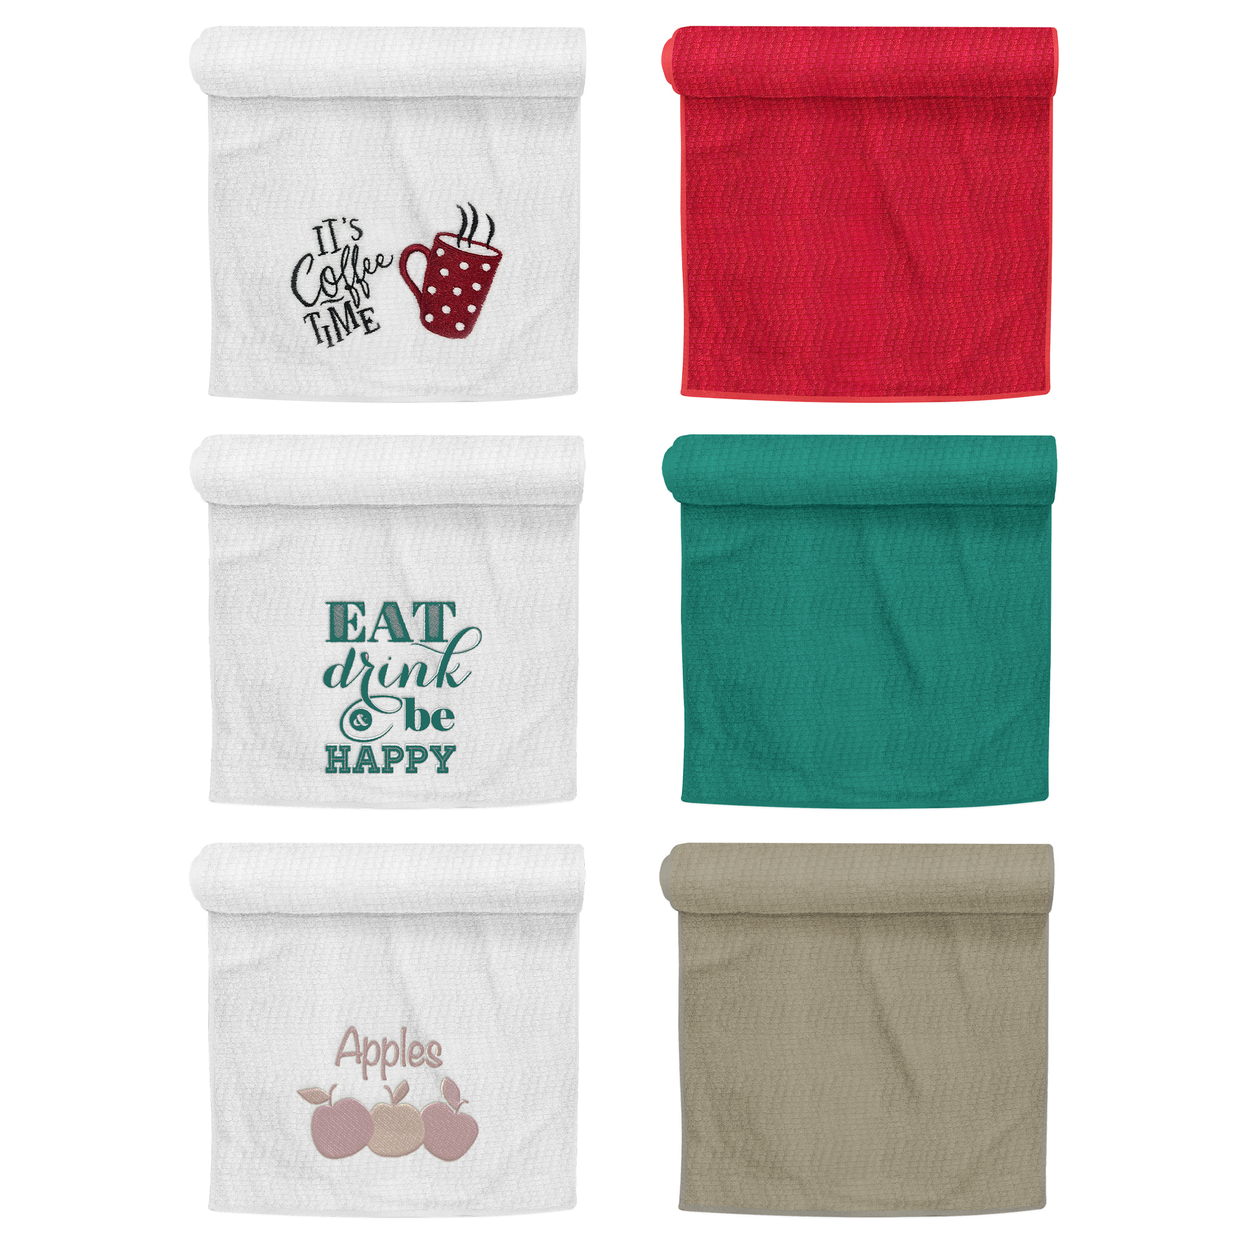 10-Pack: Ultra-Soft Super Absorbent Decorative 100% Cotton Embroidered Kitchen Dish Linen Towels